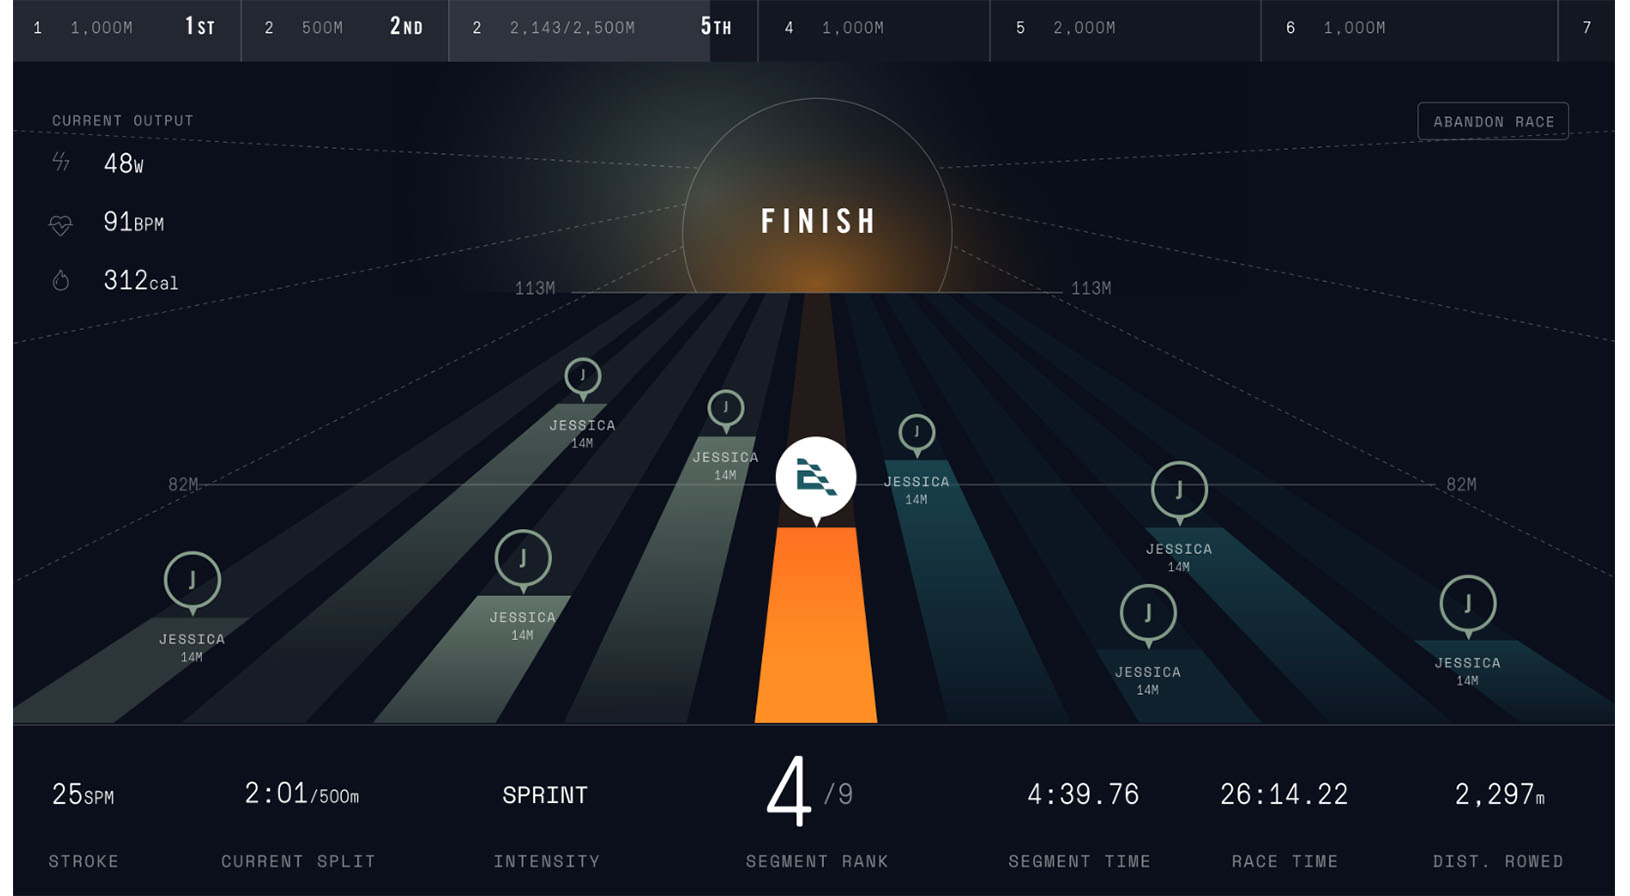 An example of the data visualization for race mode on the Ergatta rower.